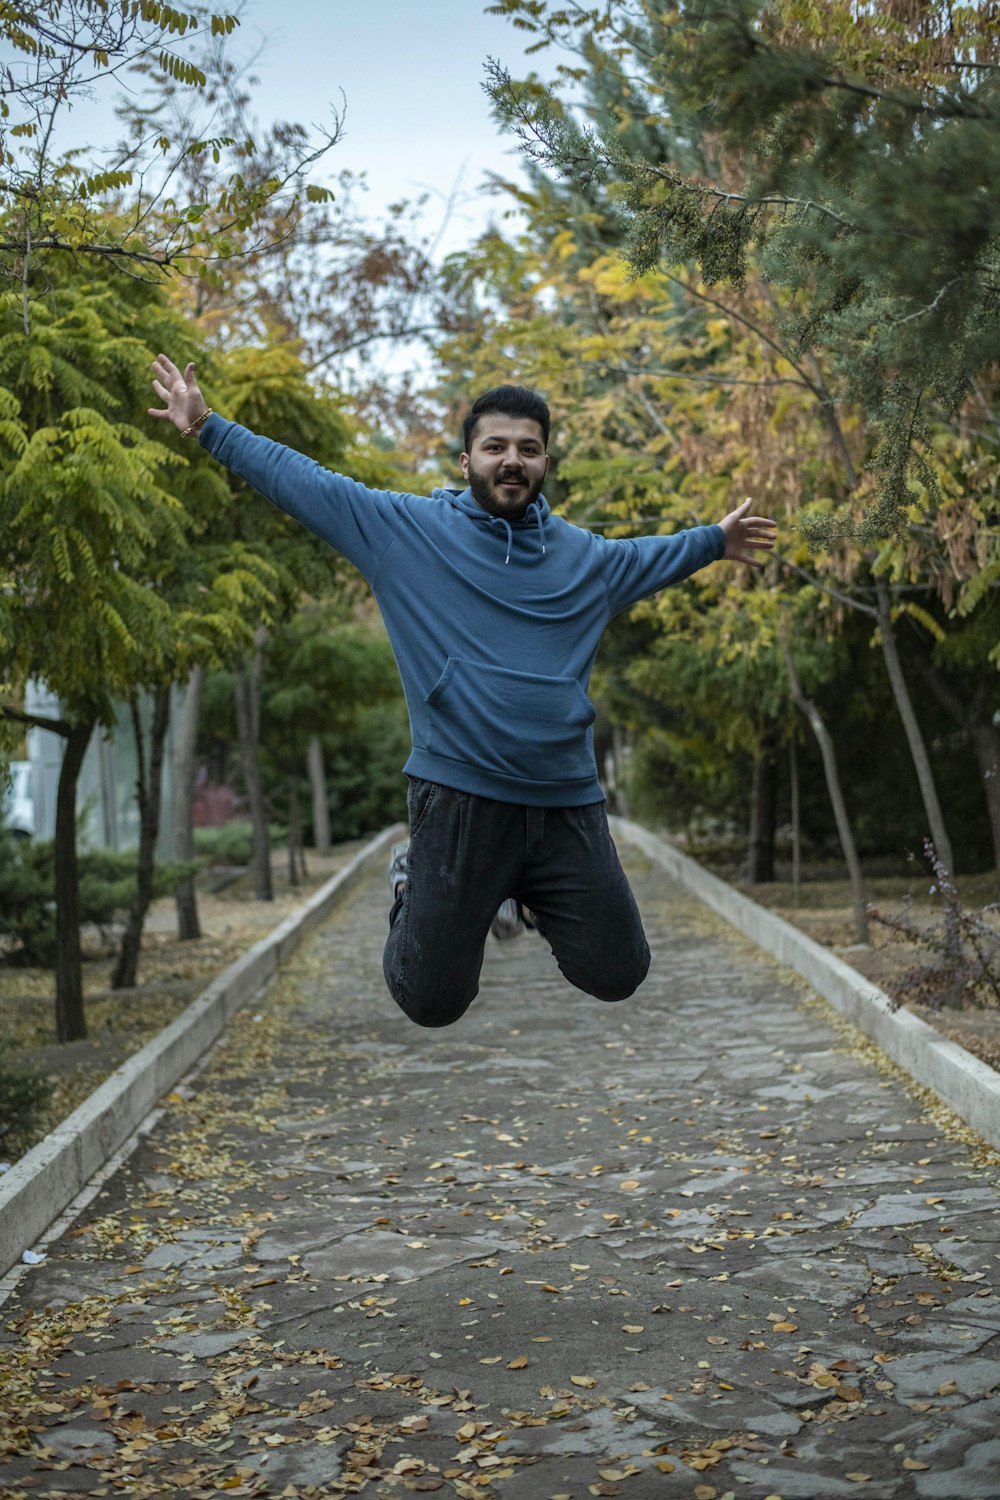 a man jumping in the air with his arms outstretched